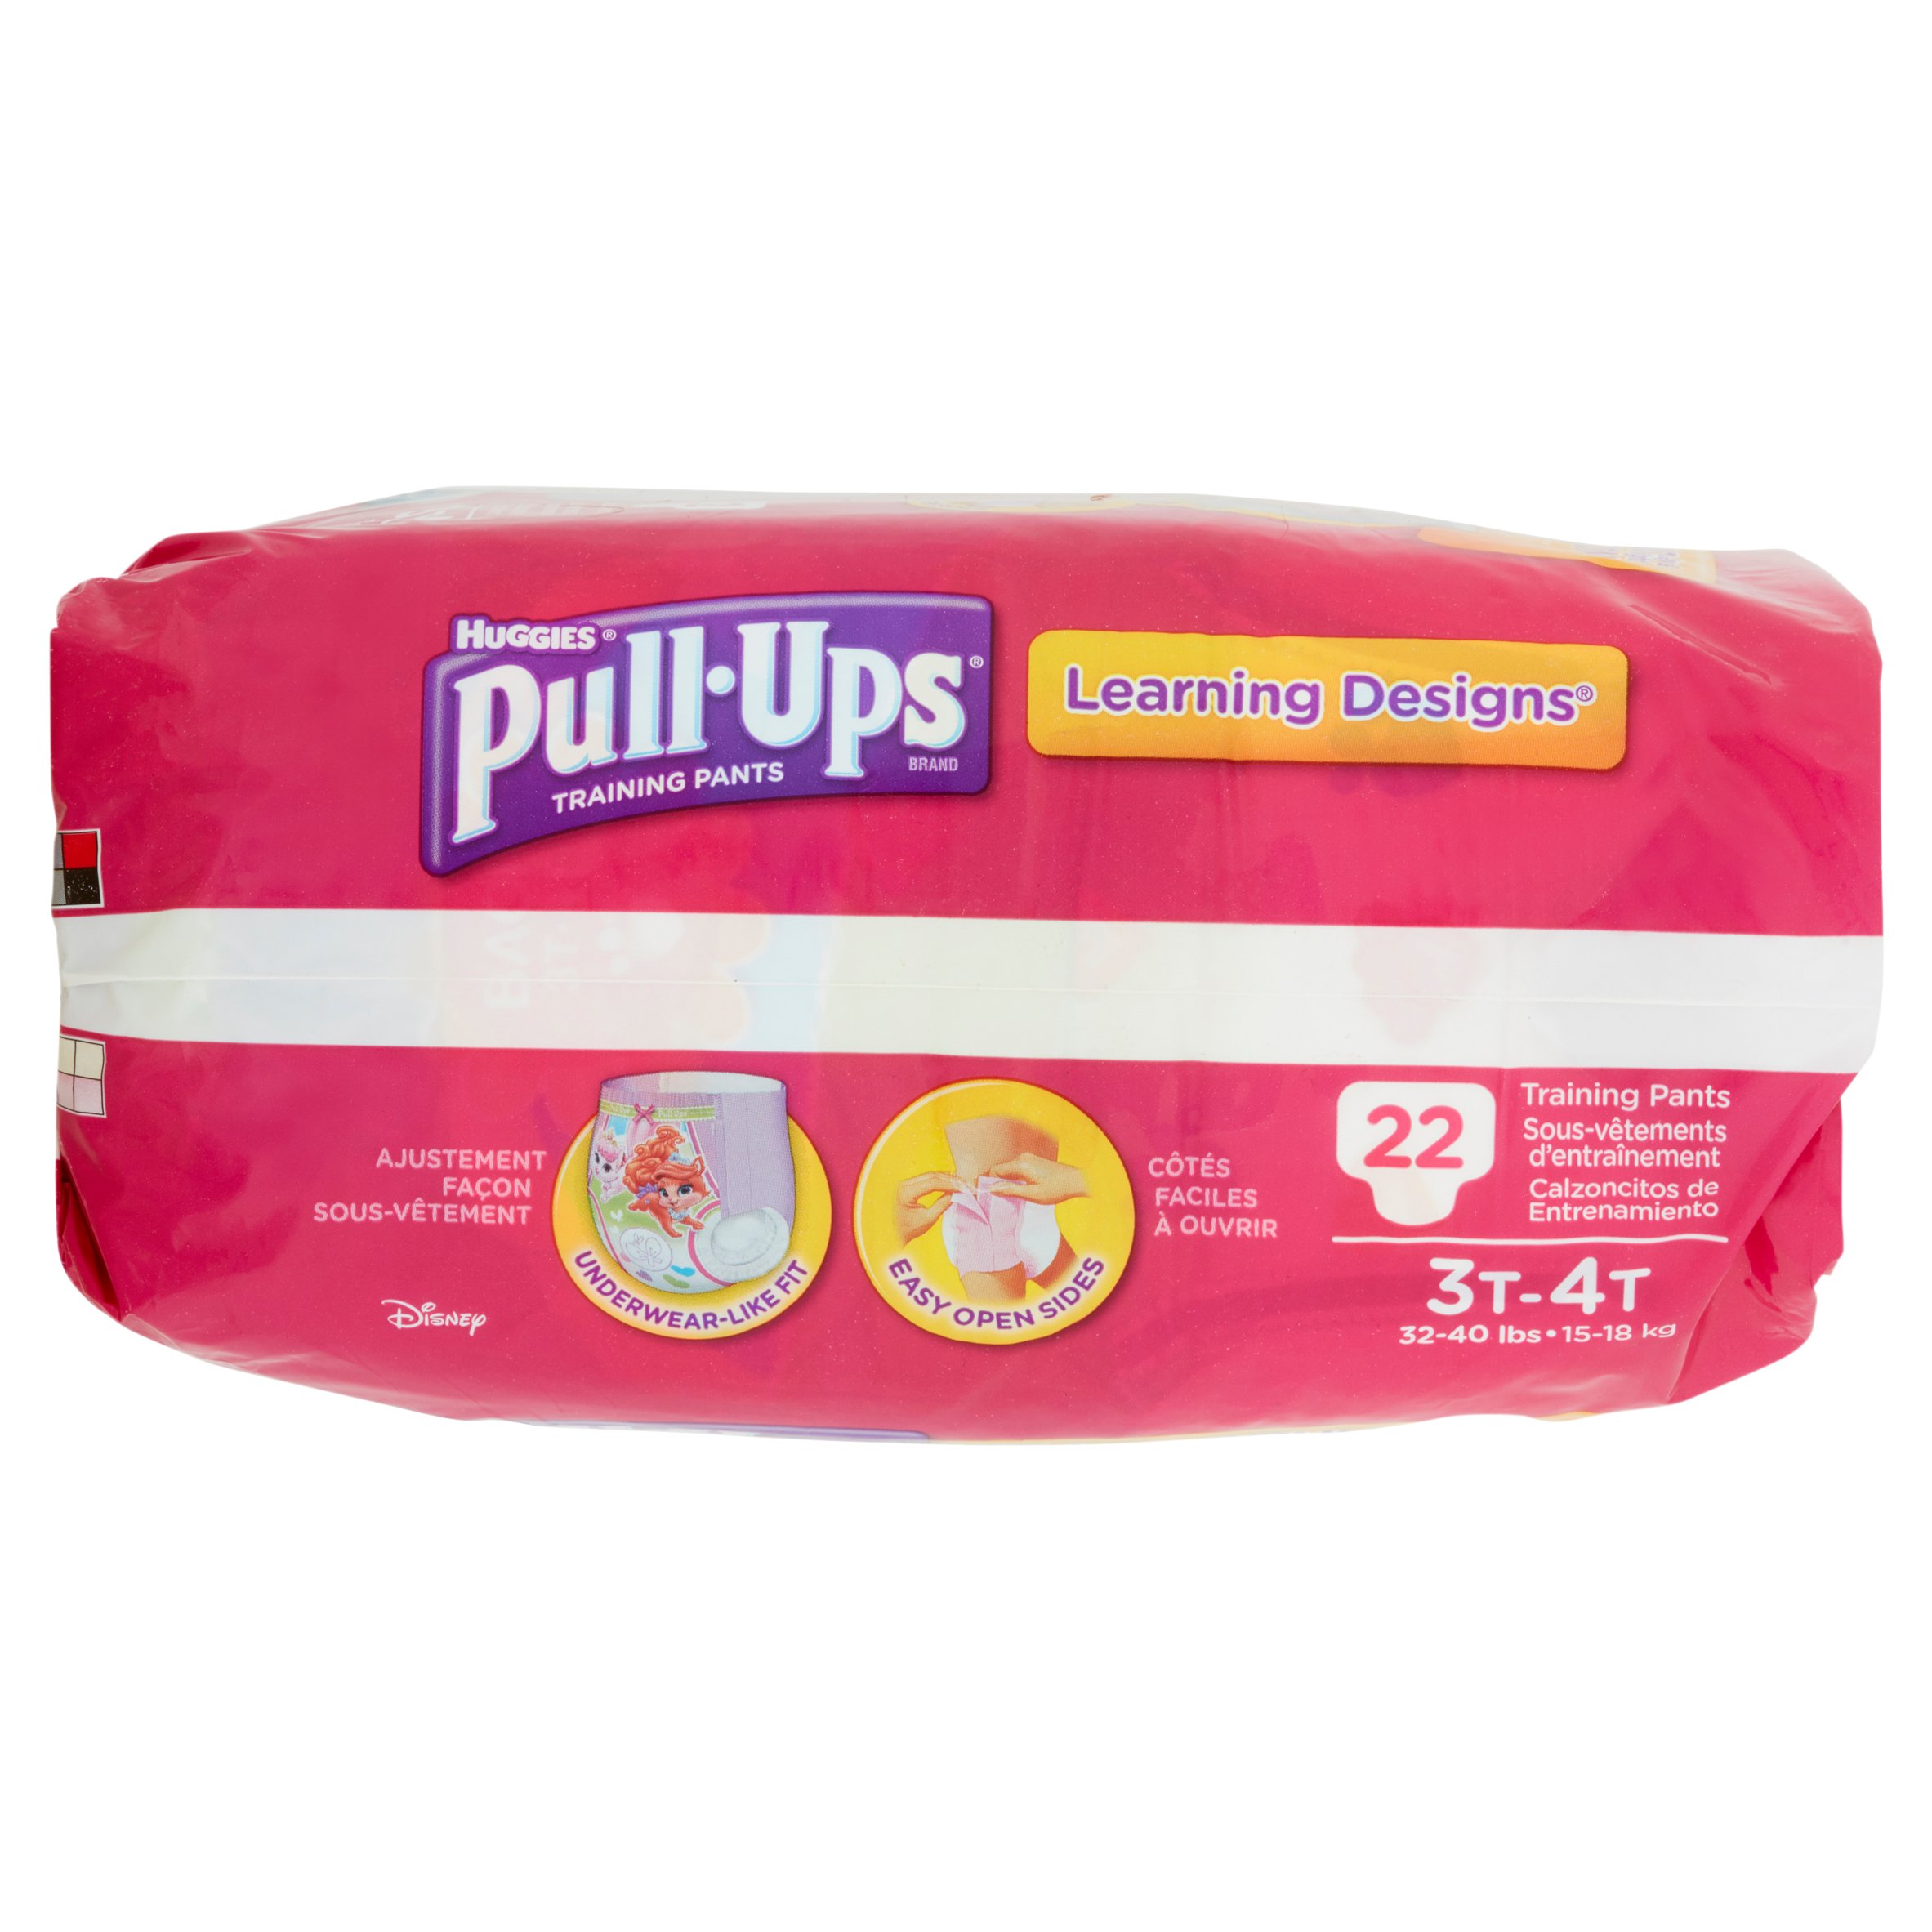 Huggies Pull-Ups All-Around Day & Night Protection Training Pants 3T-4T 32-40 lbs, 22 count - image 3 of 5